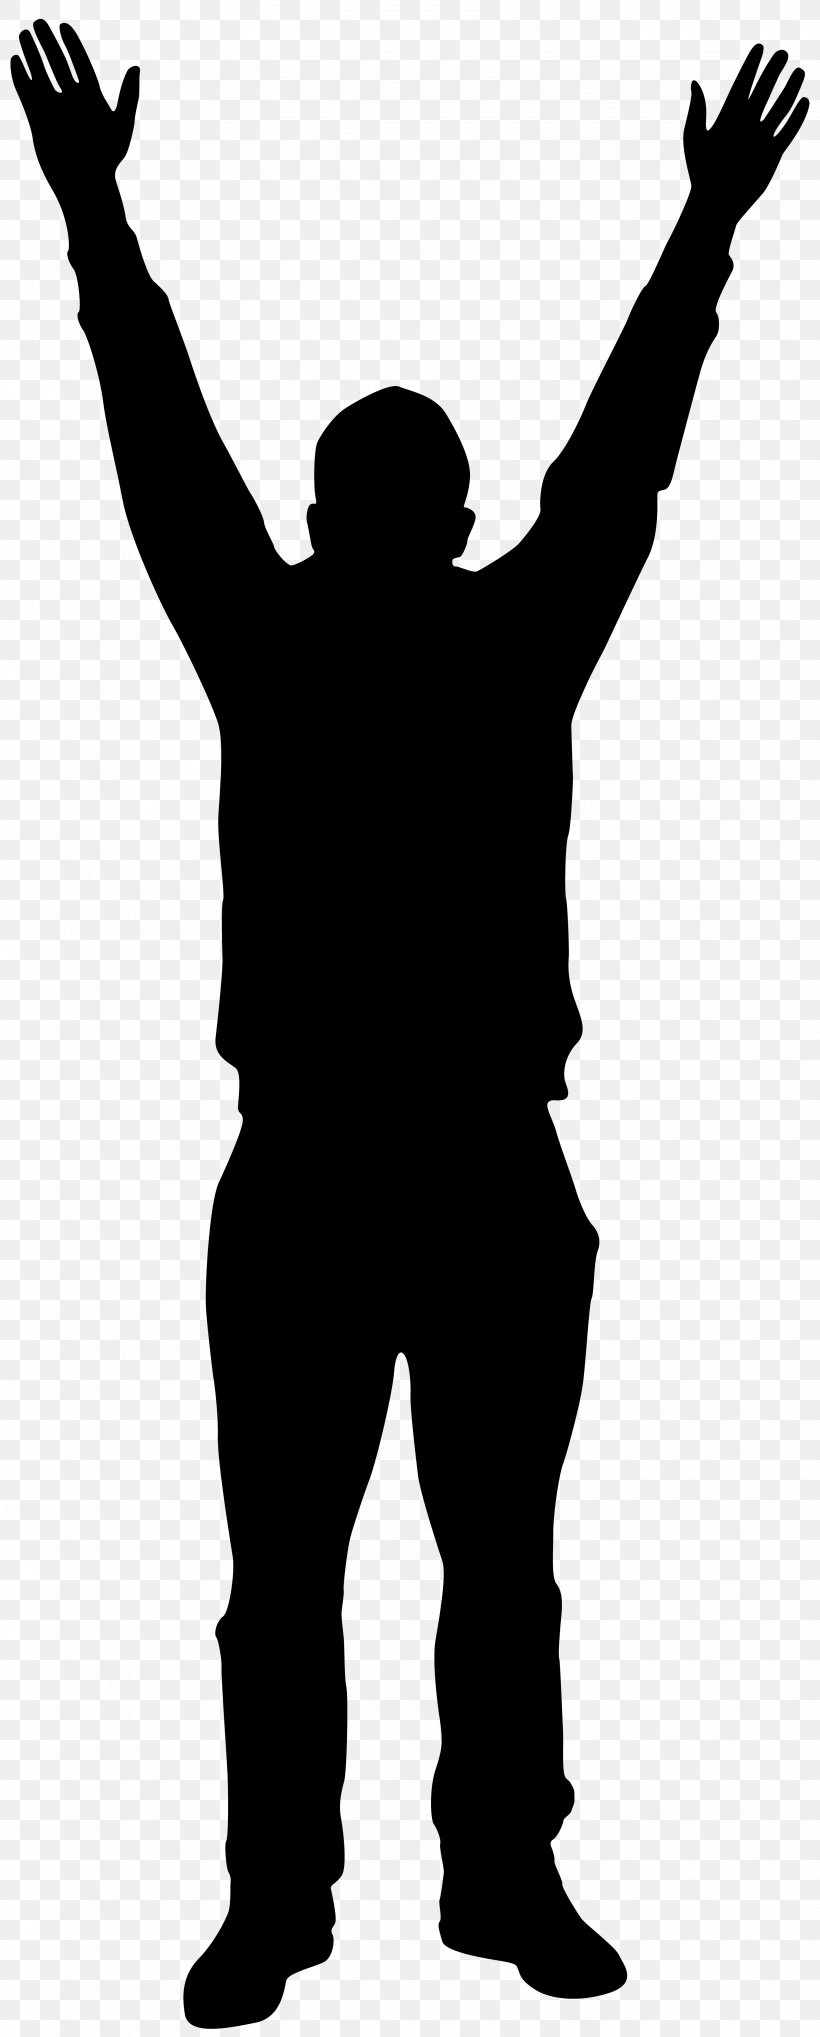 Silhouette Man Clip Art, PNG, 3219x8000px, Silhouette, Arm, Black And White, Hand, Handshake Download Free